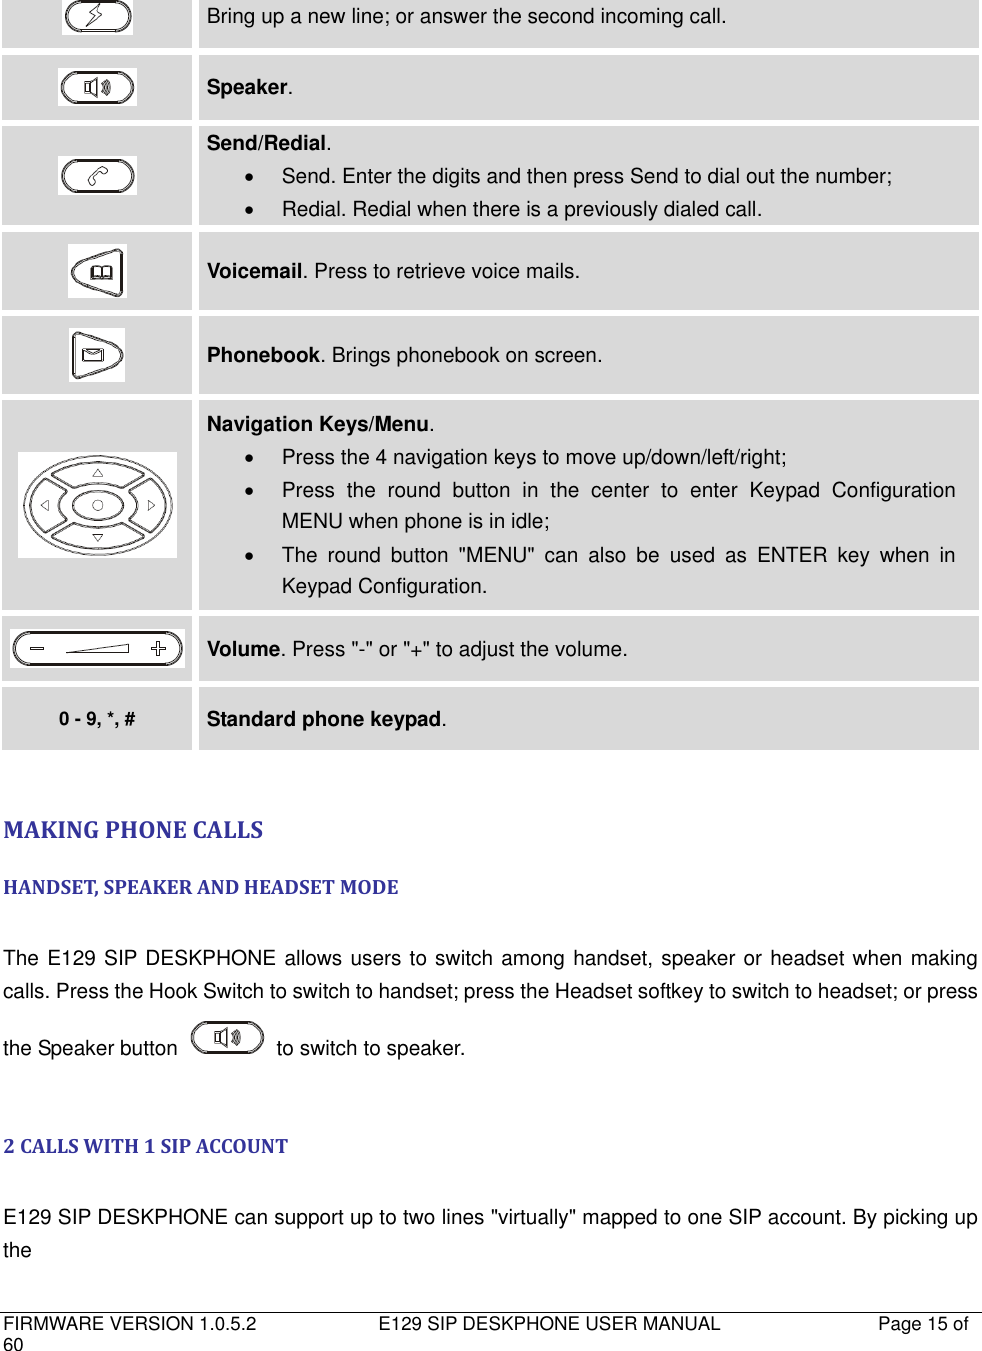   FIRMWARE VERSION 1.0.5.2                          E129 SIP DESKPHONE USER MANUAL           Page 15 of 60                                    Bring up a new line; or answer the second incoming call.  Speaker.  Send/Redial.     Send. Enter the digits and then press Send to dial out the number;  Redial. Redial when there is a previously dialed call.  Voicemail. Press to retrieve voice mails.  Phonebook. Brings phonebook on screen.  Navigation Keys/Menu.     Press the 4 navigation keys to move up/down/left/right;   Press  the  round  button  in  the  center  to  enter  Keypad  Configuration MENU when phone is in idle;   The  round  button  &quot;MENU&quot;  can  also  be  used  as  ENTER  key  when  in Keypad Configuration.  Volume. Press &quot;-&quot; or &quot;+&quot; to adjust the volume. 0 - 9, *, # Standard phone keypad.  MAKING PHONE CALLS HANDSET, SPEAKER AND HEADSET MODE  The E129 SIP DESKPHONE allows users to switch among handset, speaker or headset when making calls. Press the Hook Switch to switch to handset; press the Headset softkey to switch to headset; or press the Speaker button    to switch to speaker.  2 CALLS WITH 1 SIP ACCOUNT  E129 SIP DESKPHONE can support up to two lines &quot;virtually&quot; mapped to one SIP account. By picking up the   